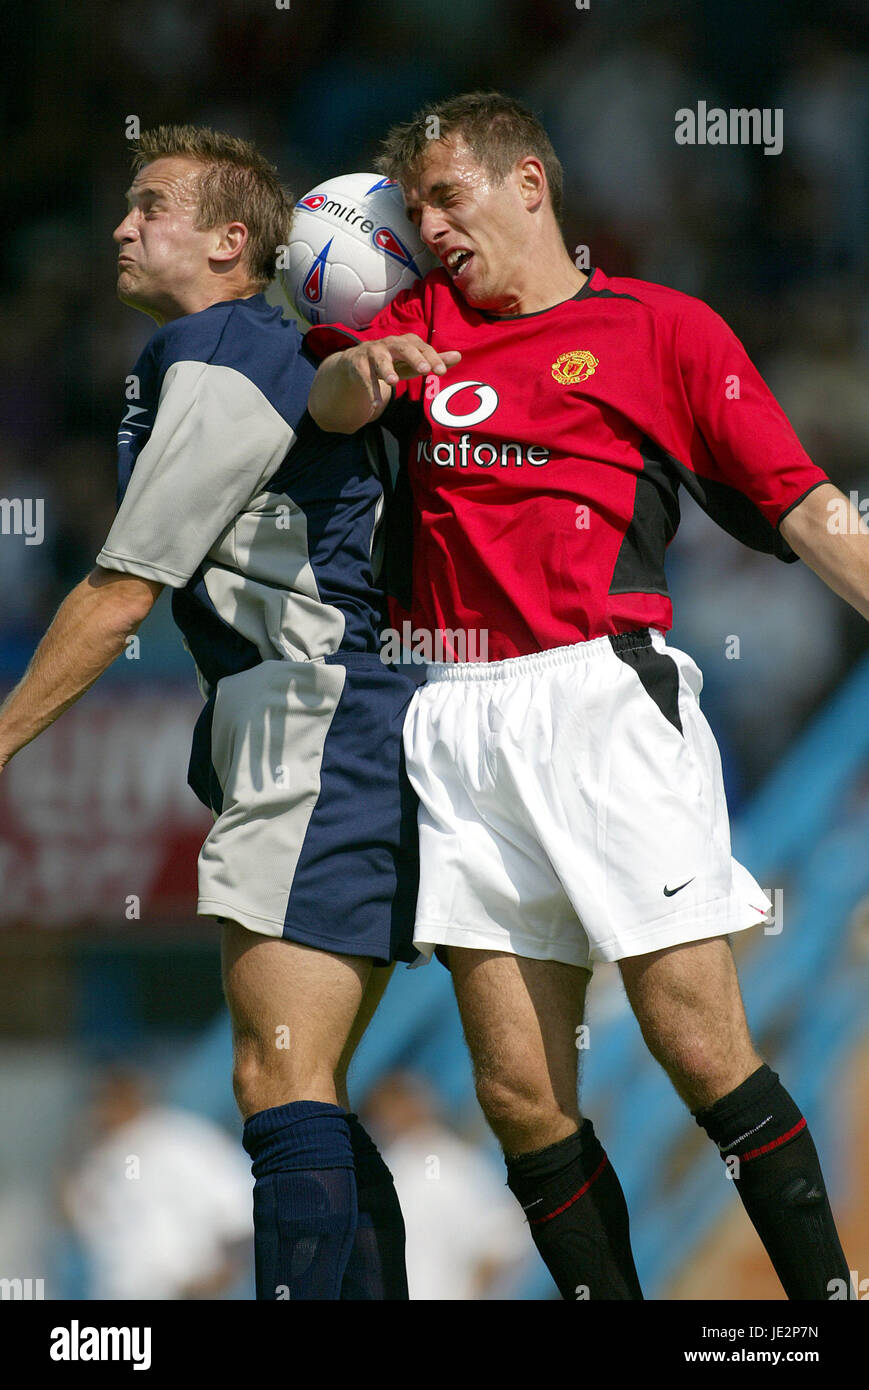 PHILIP NEVILLE MANCHESTER UNITED FC SALTERGATE CHESTERFIELD ANGLETERRE 26 Juillet 2002 Banque D'Images